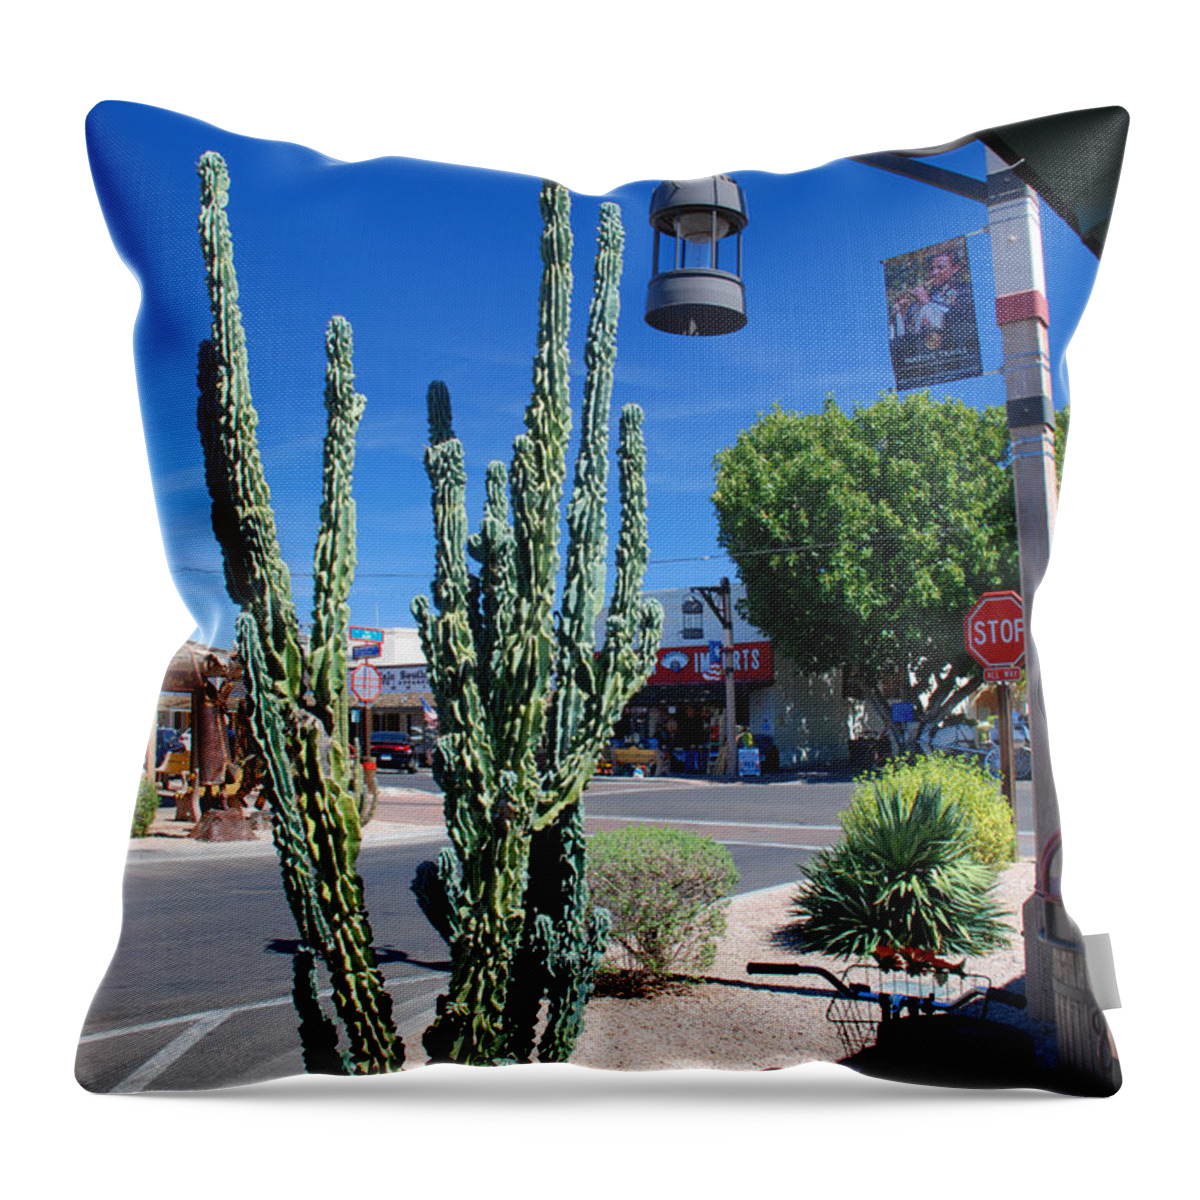 Cactus Old Town Scottsdale Arizona Throw Pillow featuring the photograph Old Town Cactus by Richard Gibb